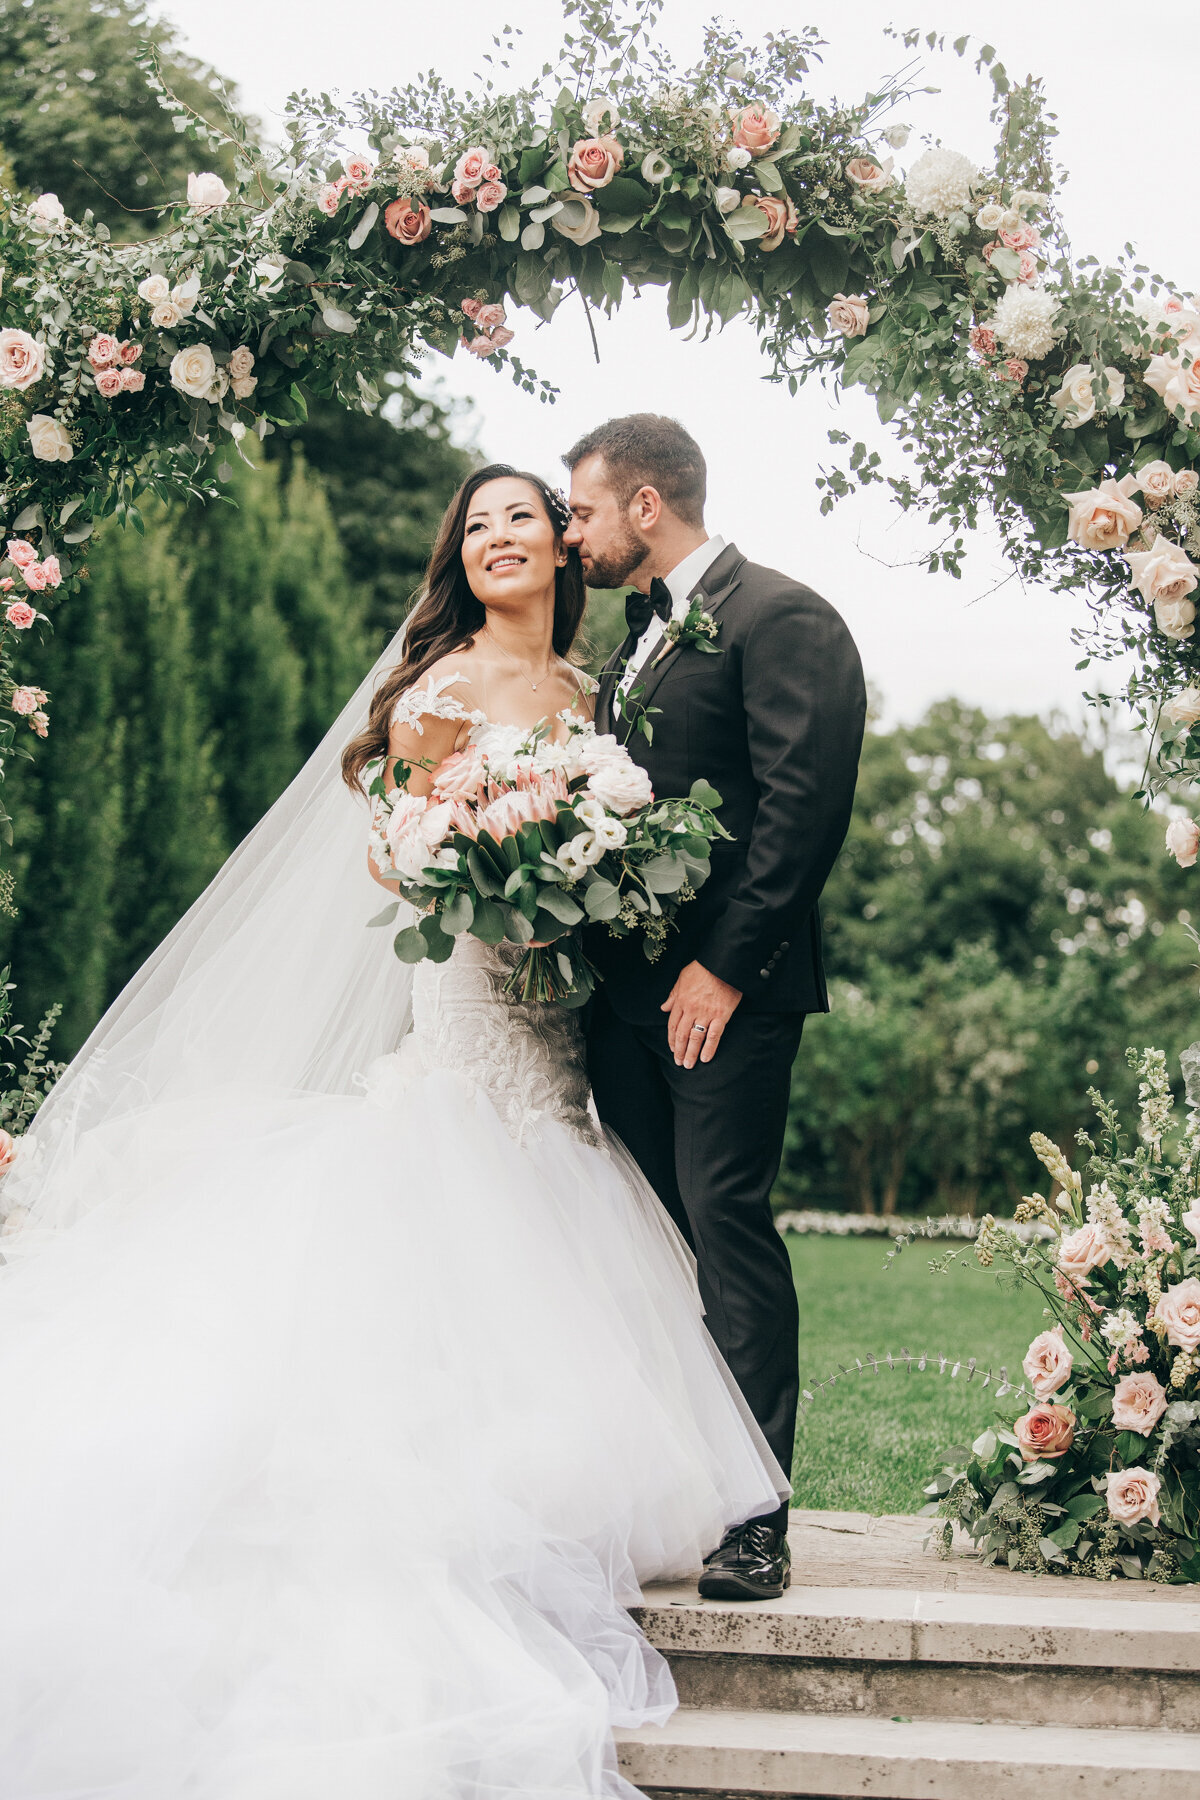 Glamorous portraits of bride and groom under floral arch